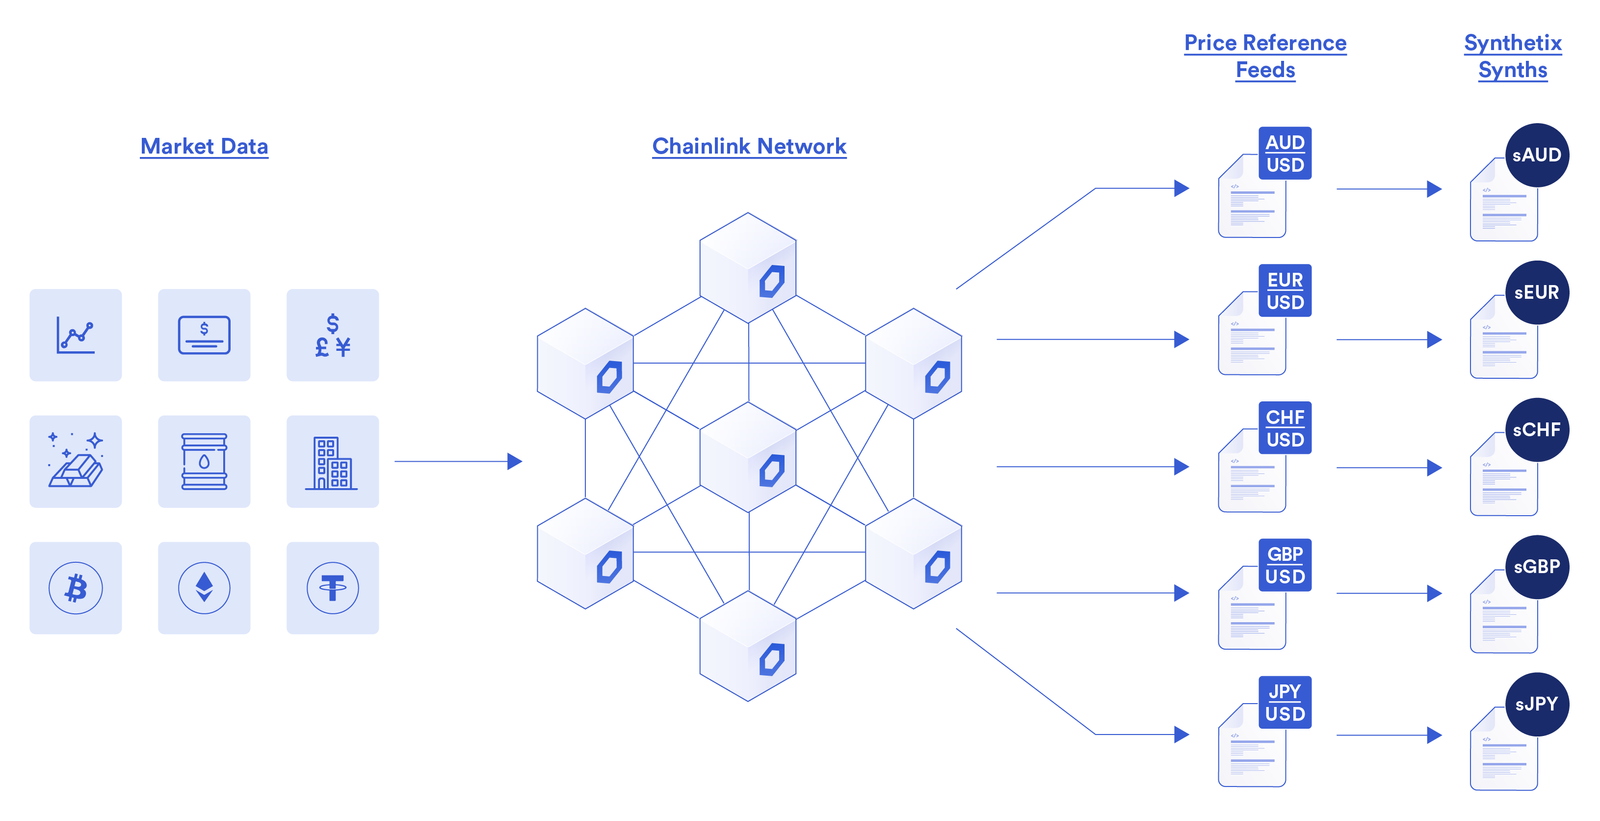 How Synthetix Exchange uses Chainlink oracles to obtain real-time market data of various FX currencies.